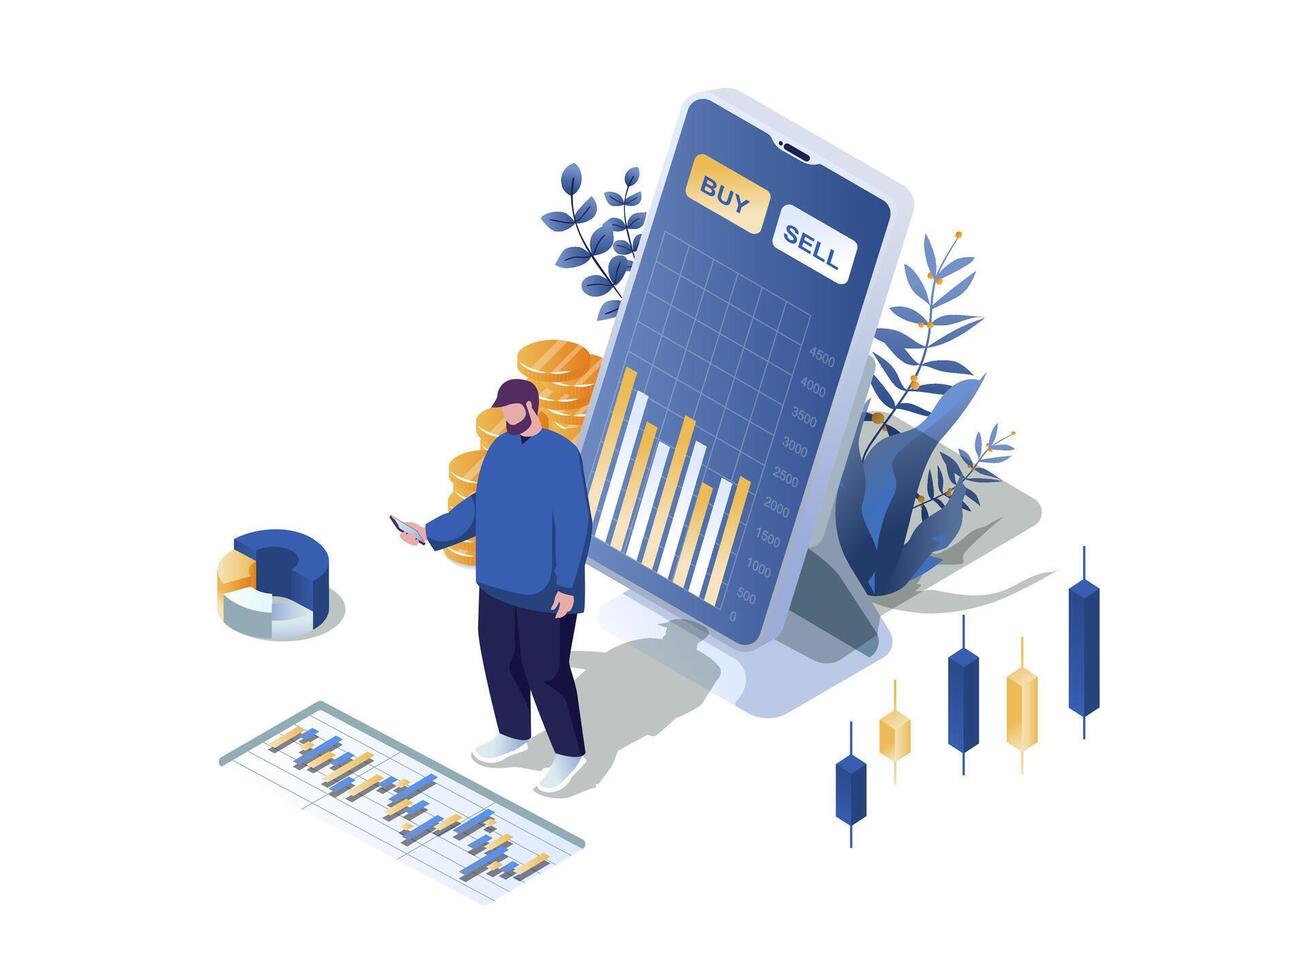 Investing via mobile phone concept 3d isometric web scene. People making investments using smartphone apps, analizing trend market for buys or sells. Vector illustration in isometry graphic design